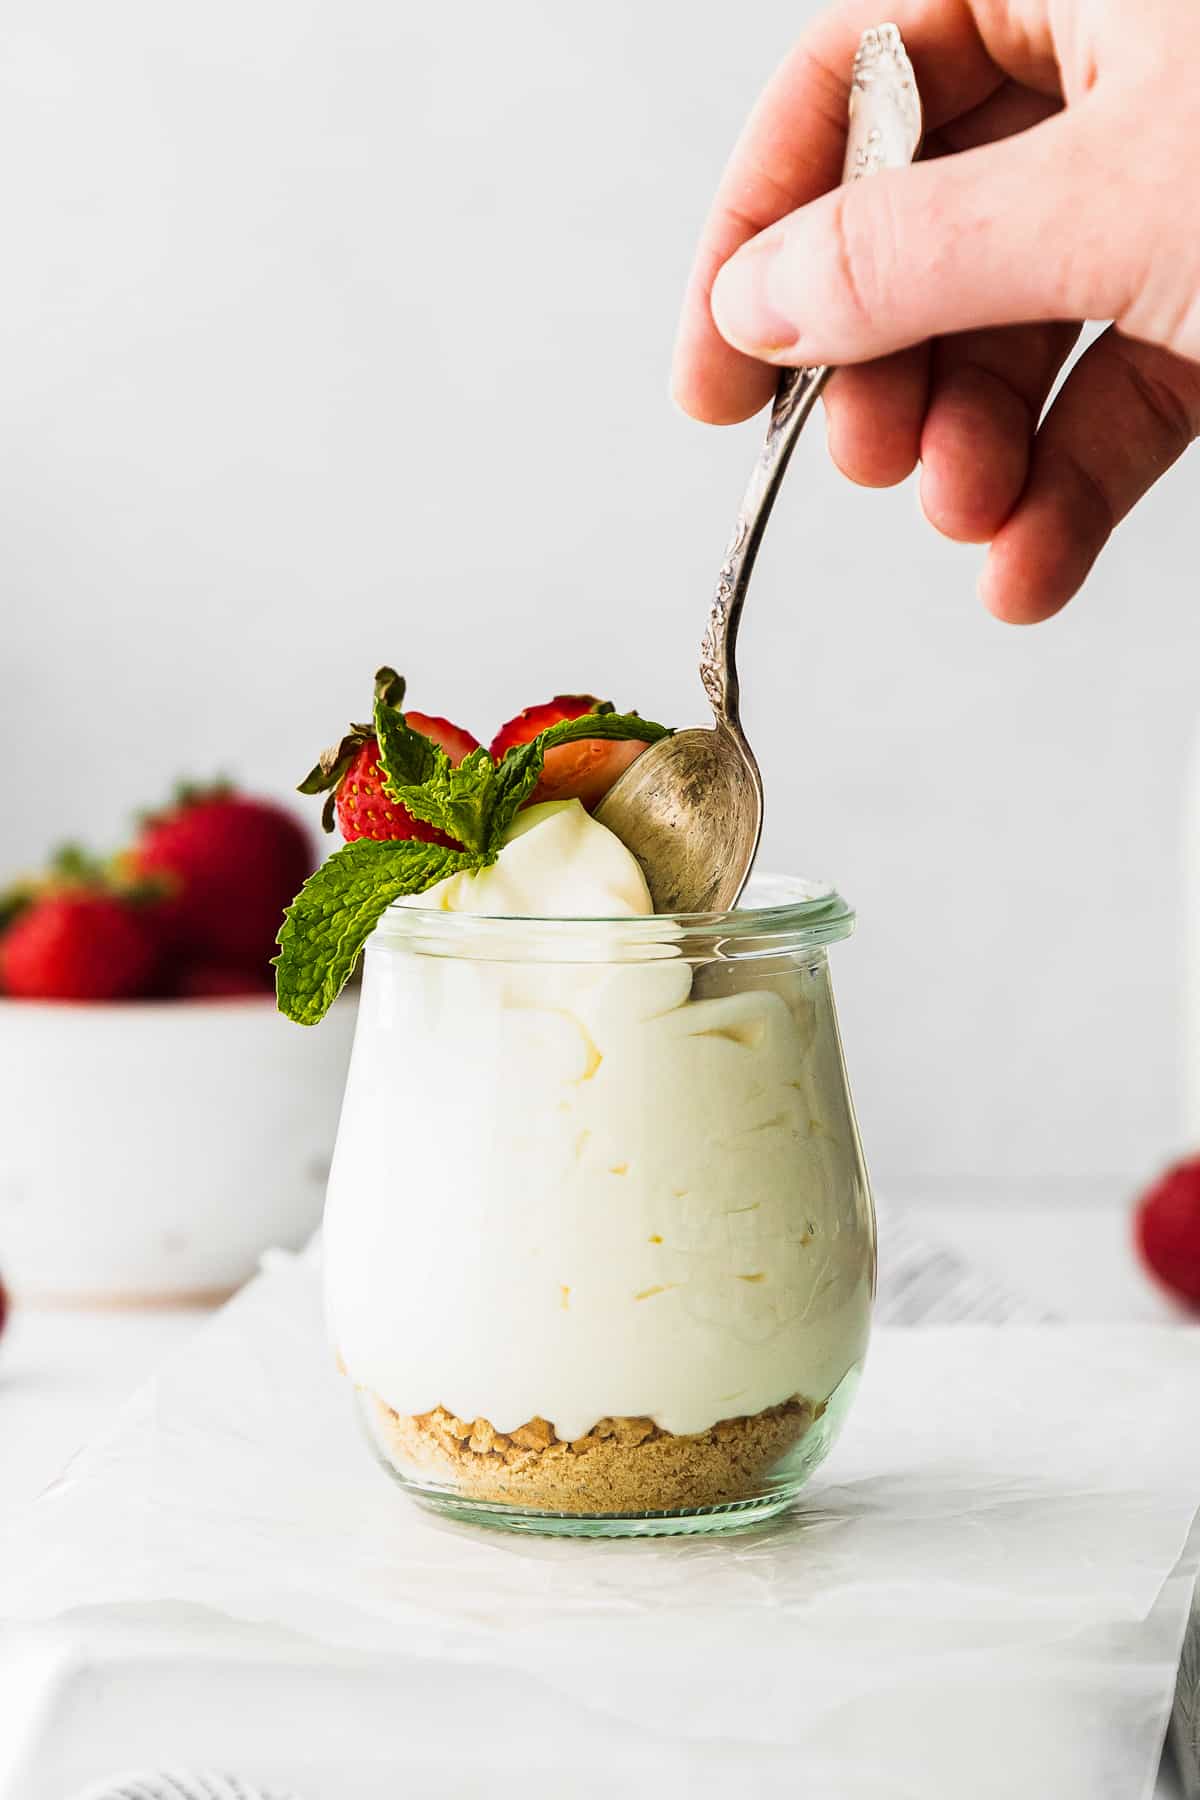 spoon in cheesecake mousse topped with strawberries